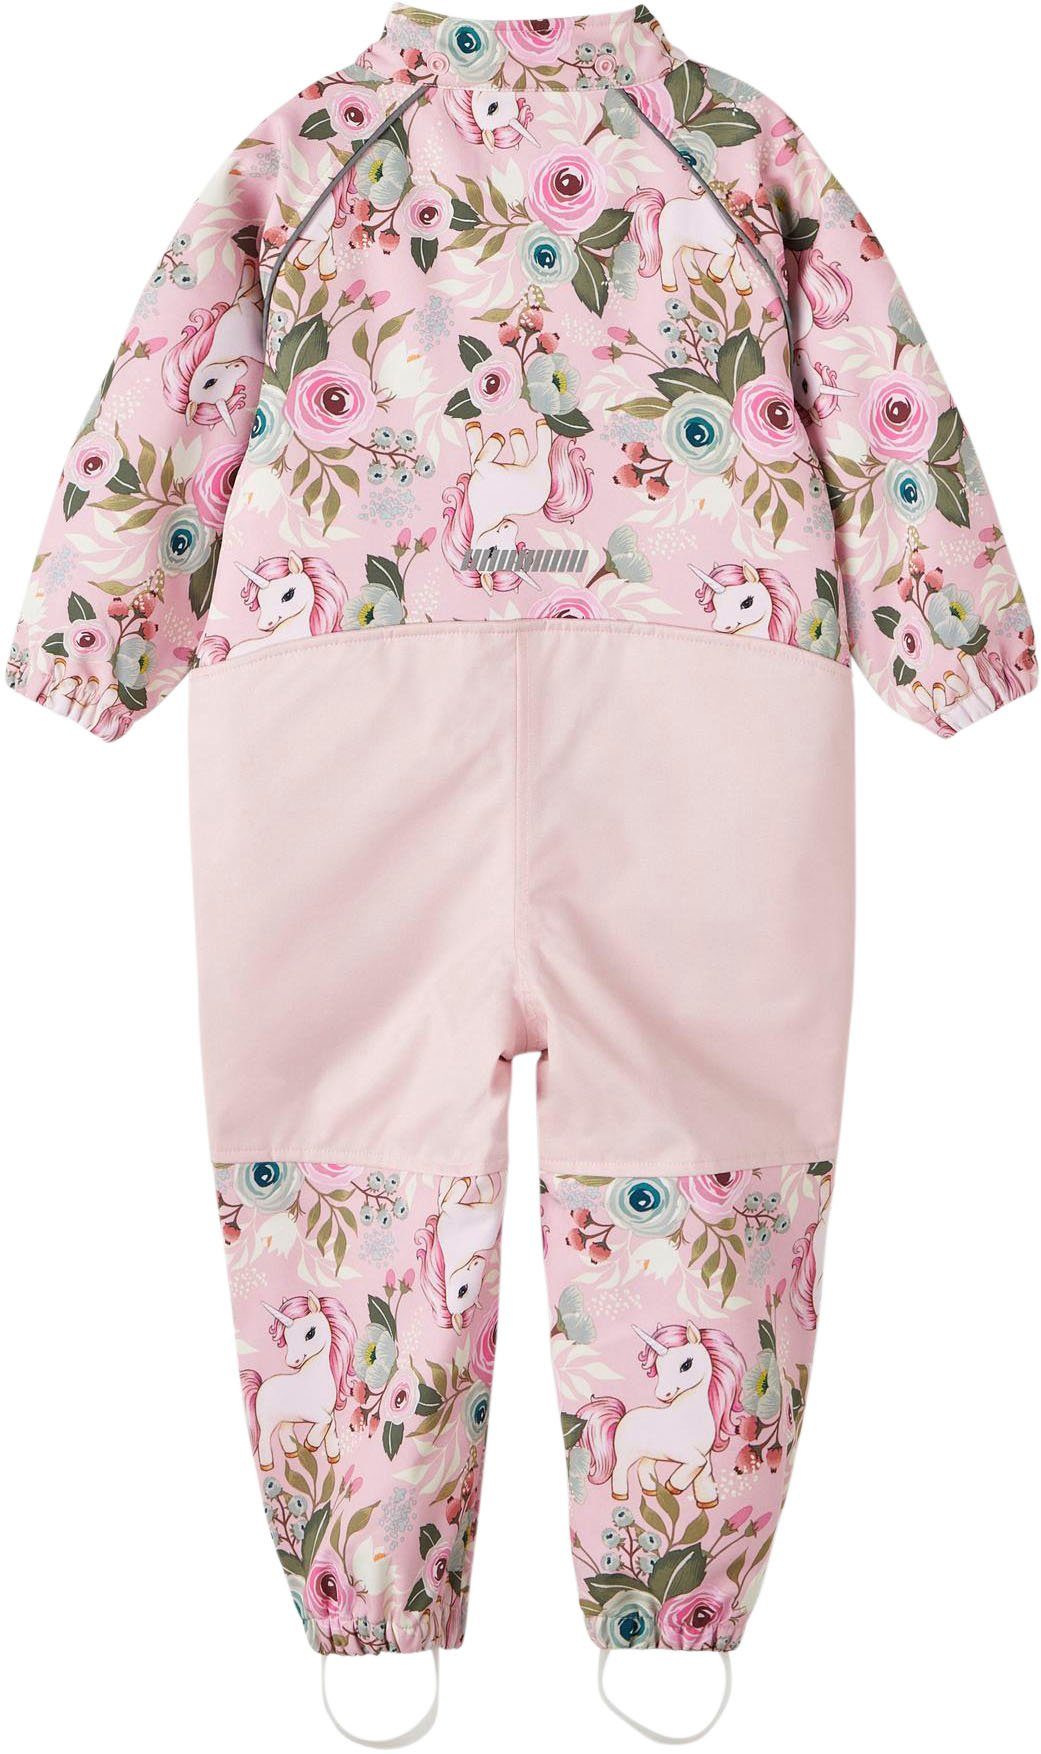 NOOS NMFALFA nectar SUIT Softshelloverall pink FLORAL It Name 2FO